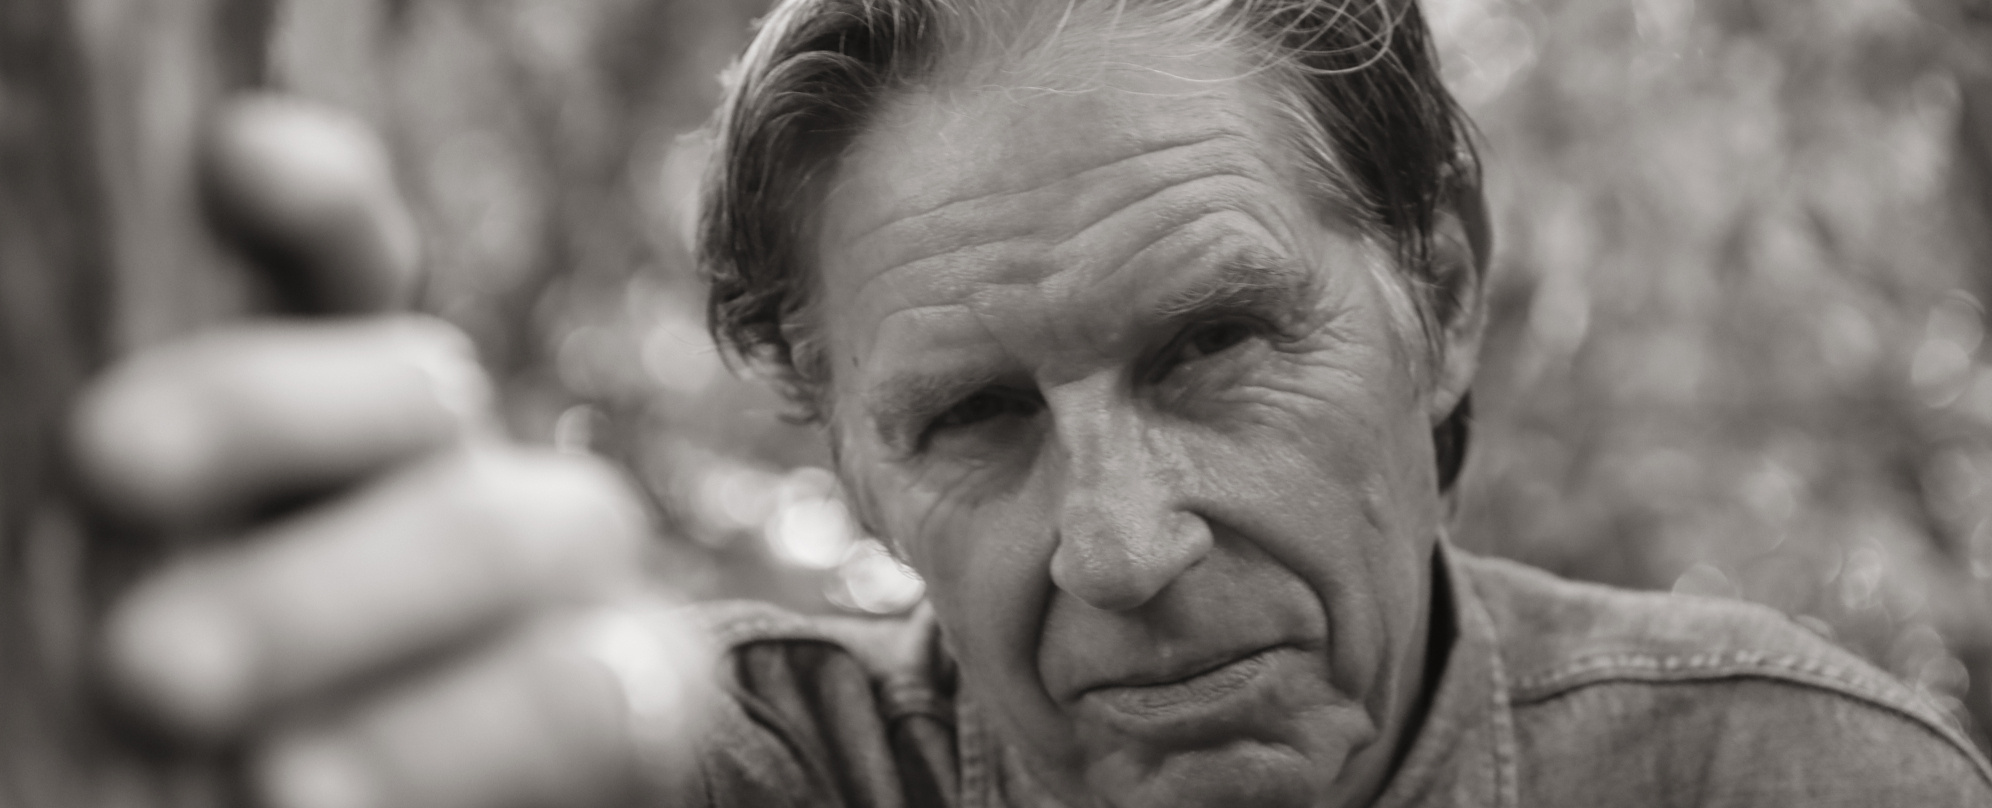 Review: X Frontman John Doe Returns to Acoustic Folk for These Poetic Old West Fables